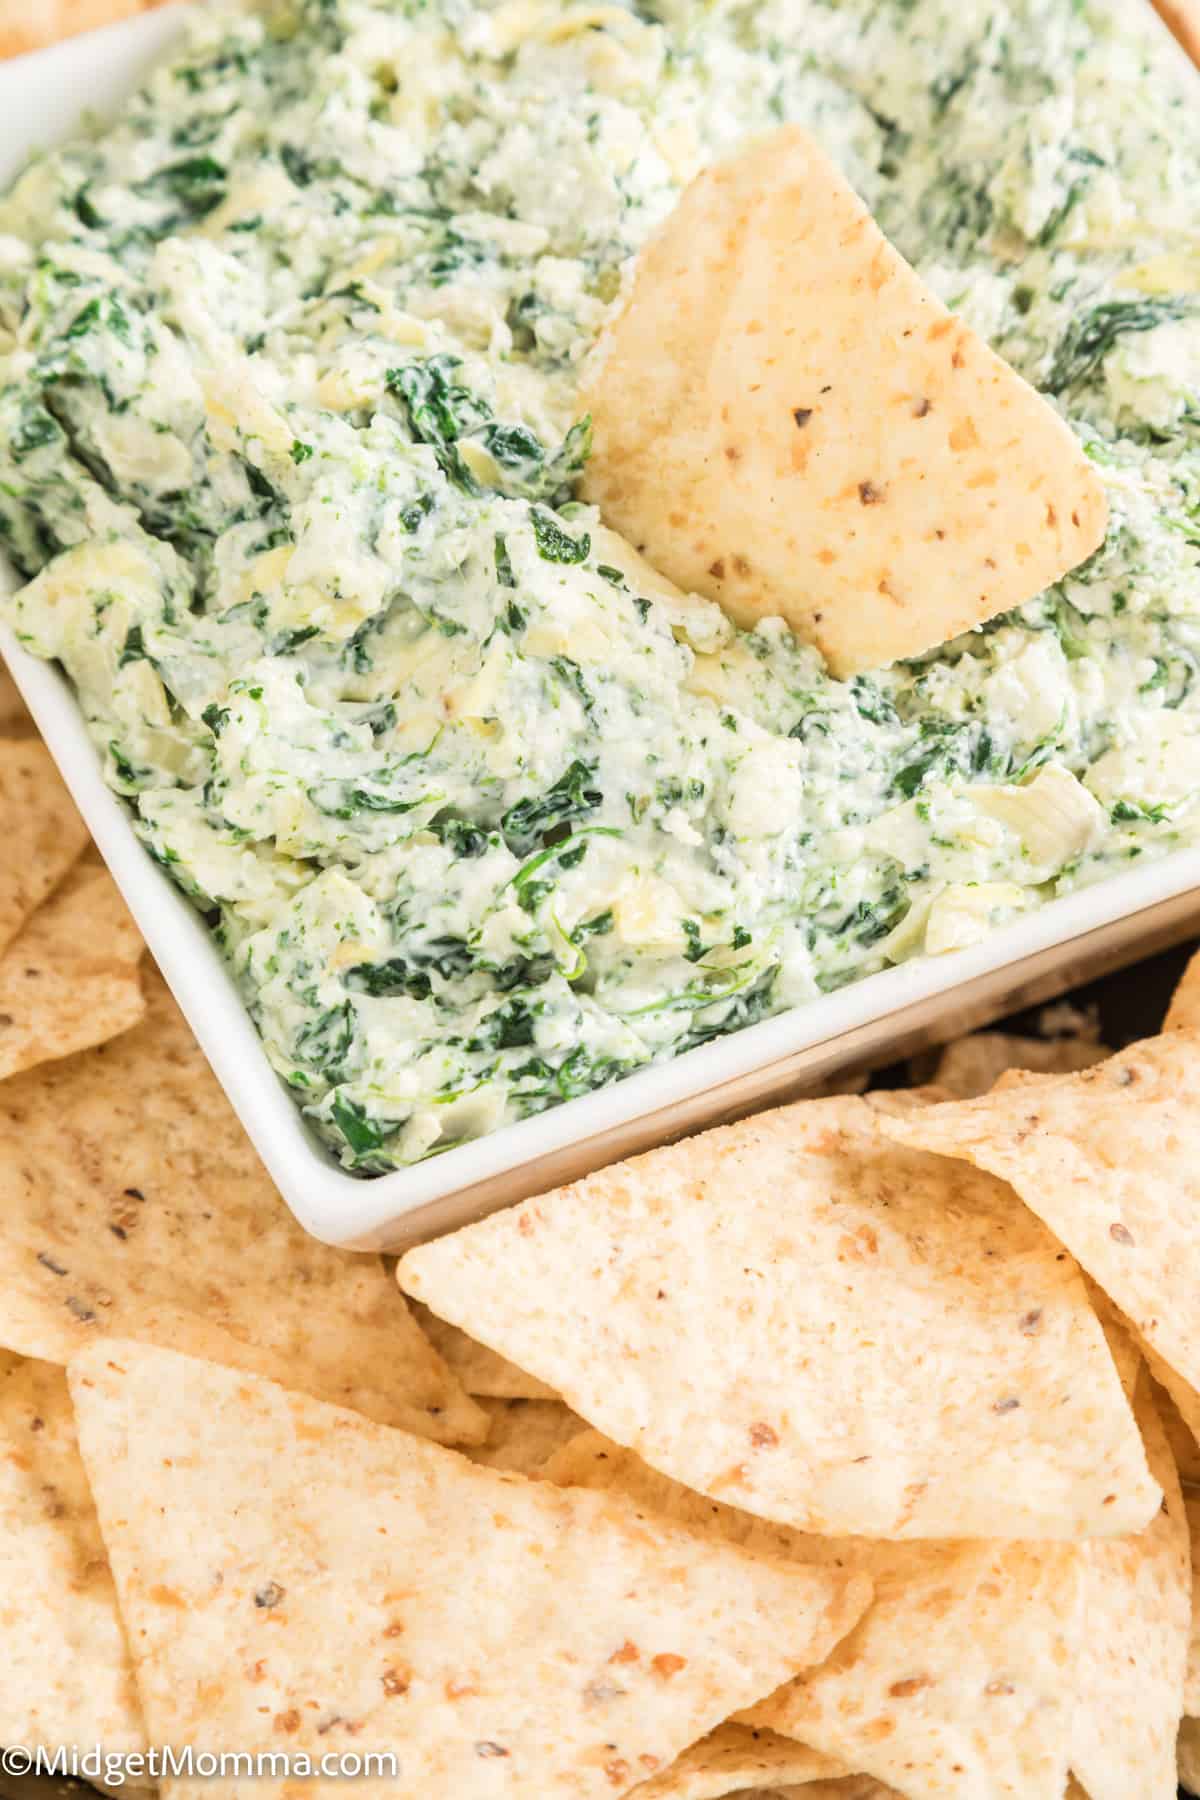 serving dish filled with Cold Spinach Artichoke dip